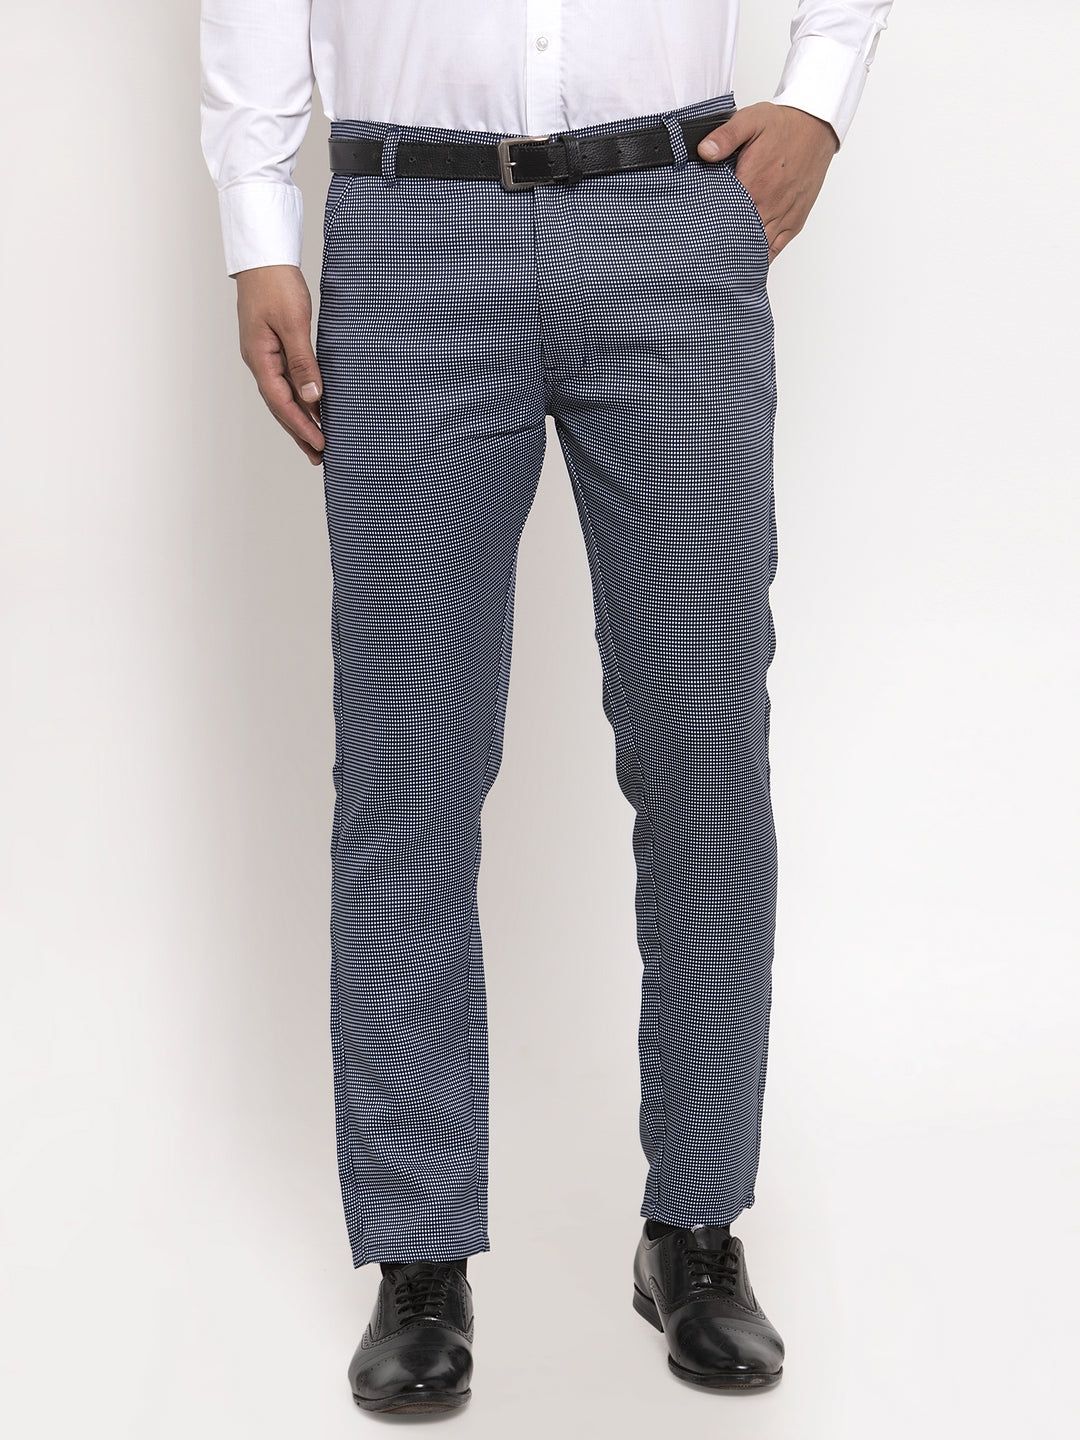 Mens Formal Trousers In Tarn Taran - Prices, Manufacturers & Suppliers